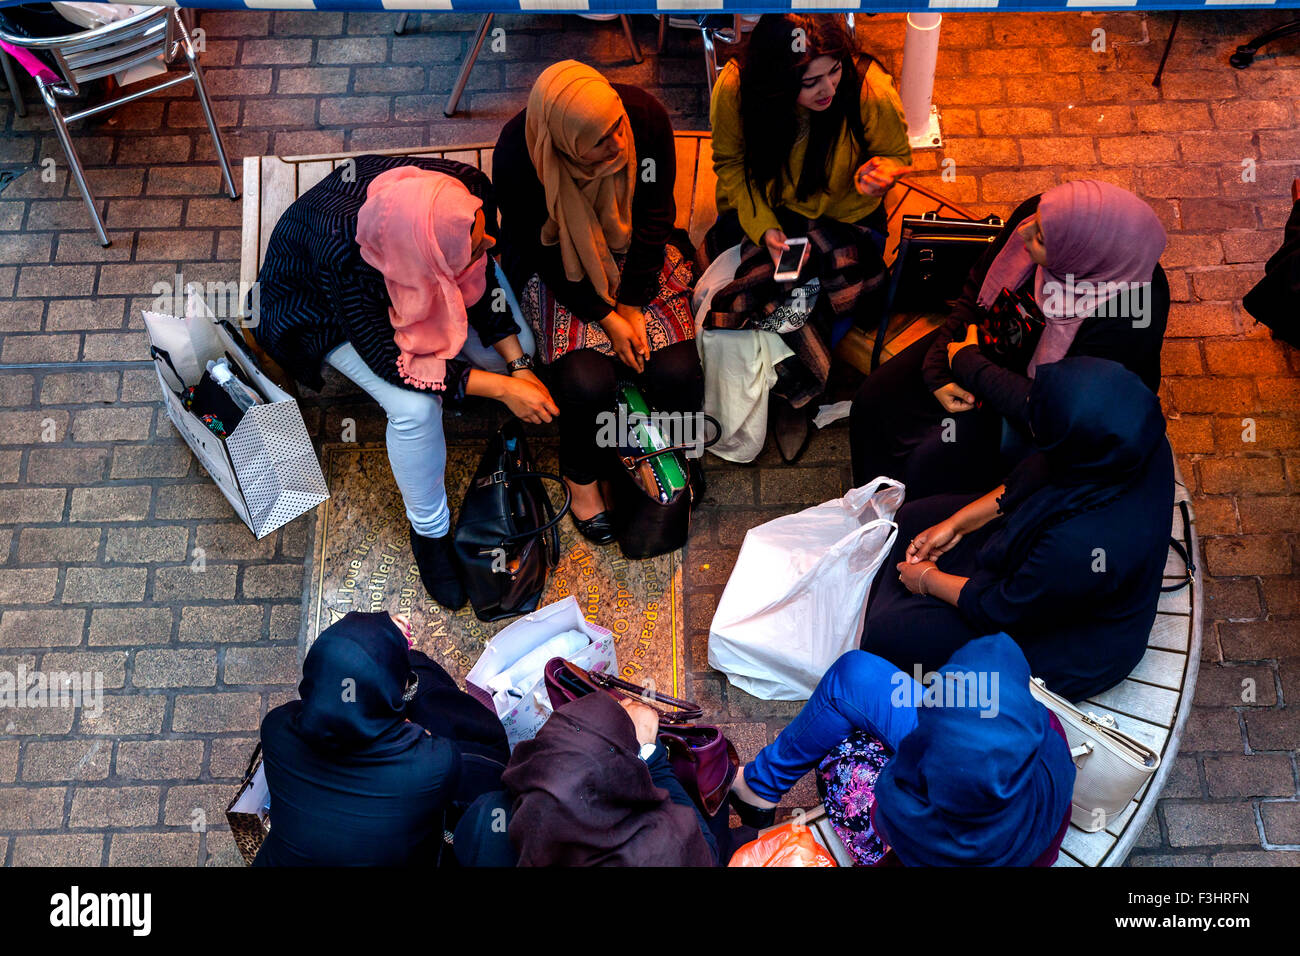 Young Muslim Women Sit Chatting At A Cafe In Carnaby Street, London, UK Stock Photo